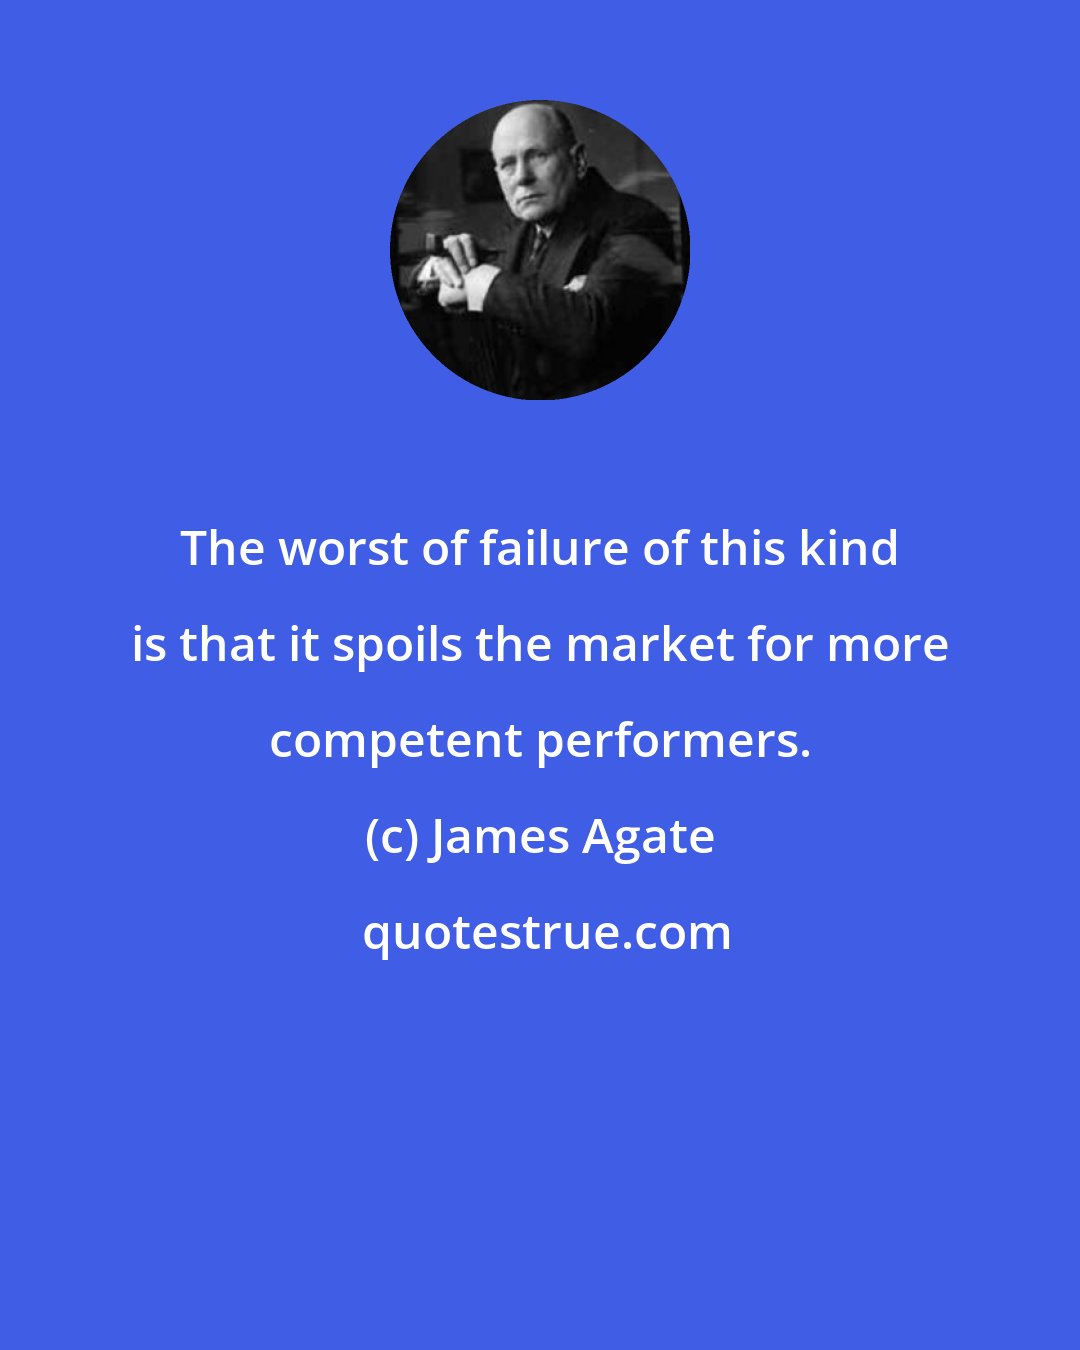 James Agate: The worst of failure of this kind is that it spoils the market for more competent performers.